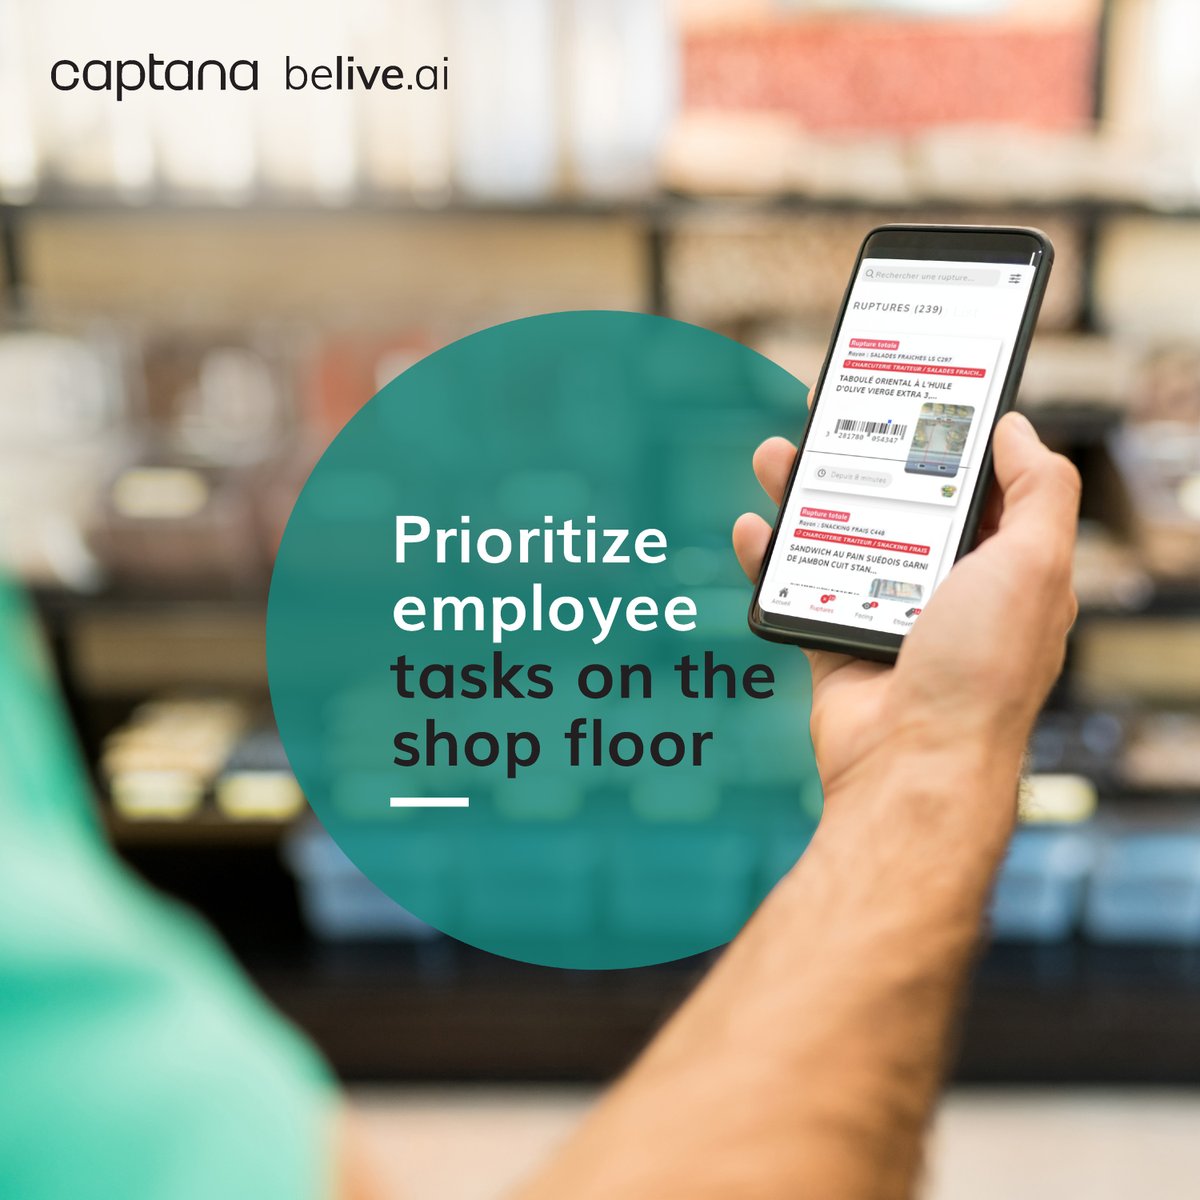 Our AI solutions guide store employees to focus on what matters the most and remove department silos. Partner with us to transform your retail business.

Captana - belive.ai, a SES-imagotag company. 

#storemanagement #retailtech #retaillife #retailbusiness #aidata